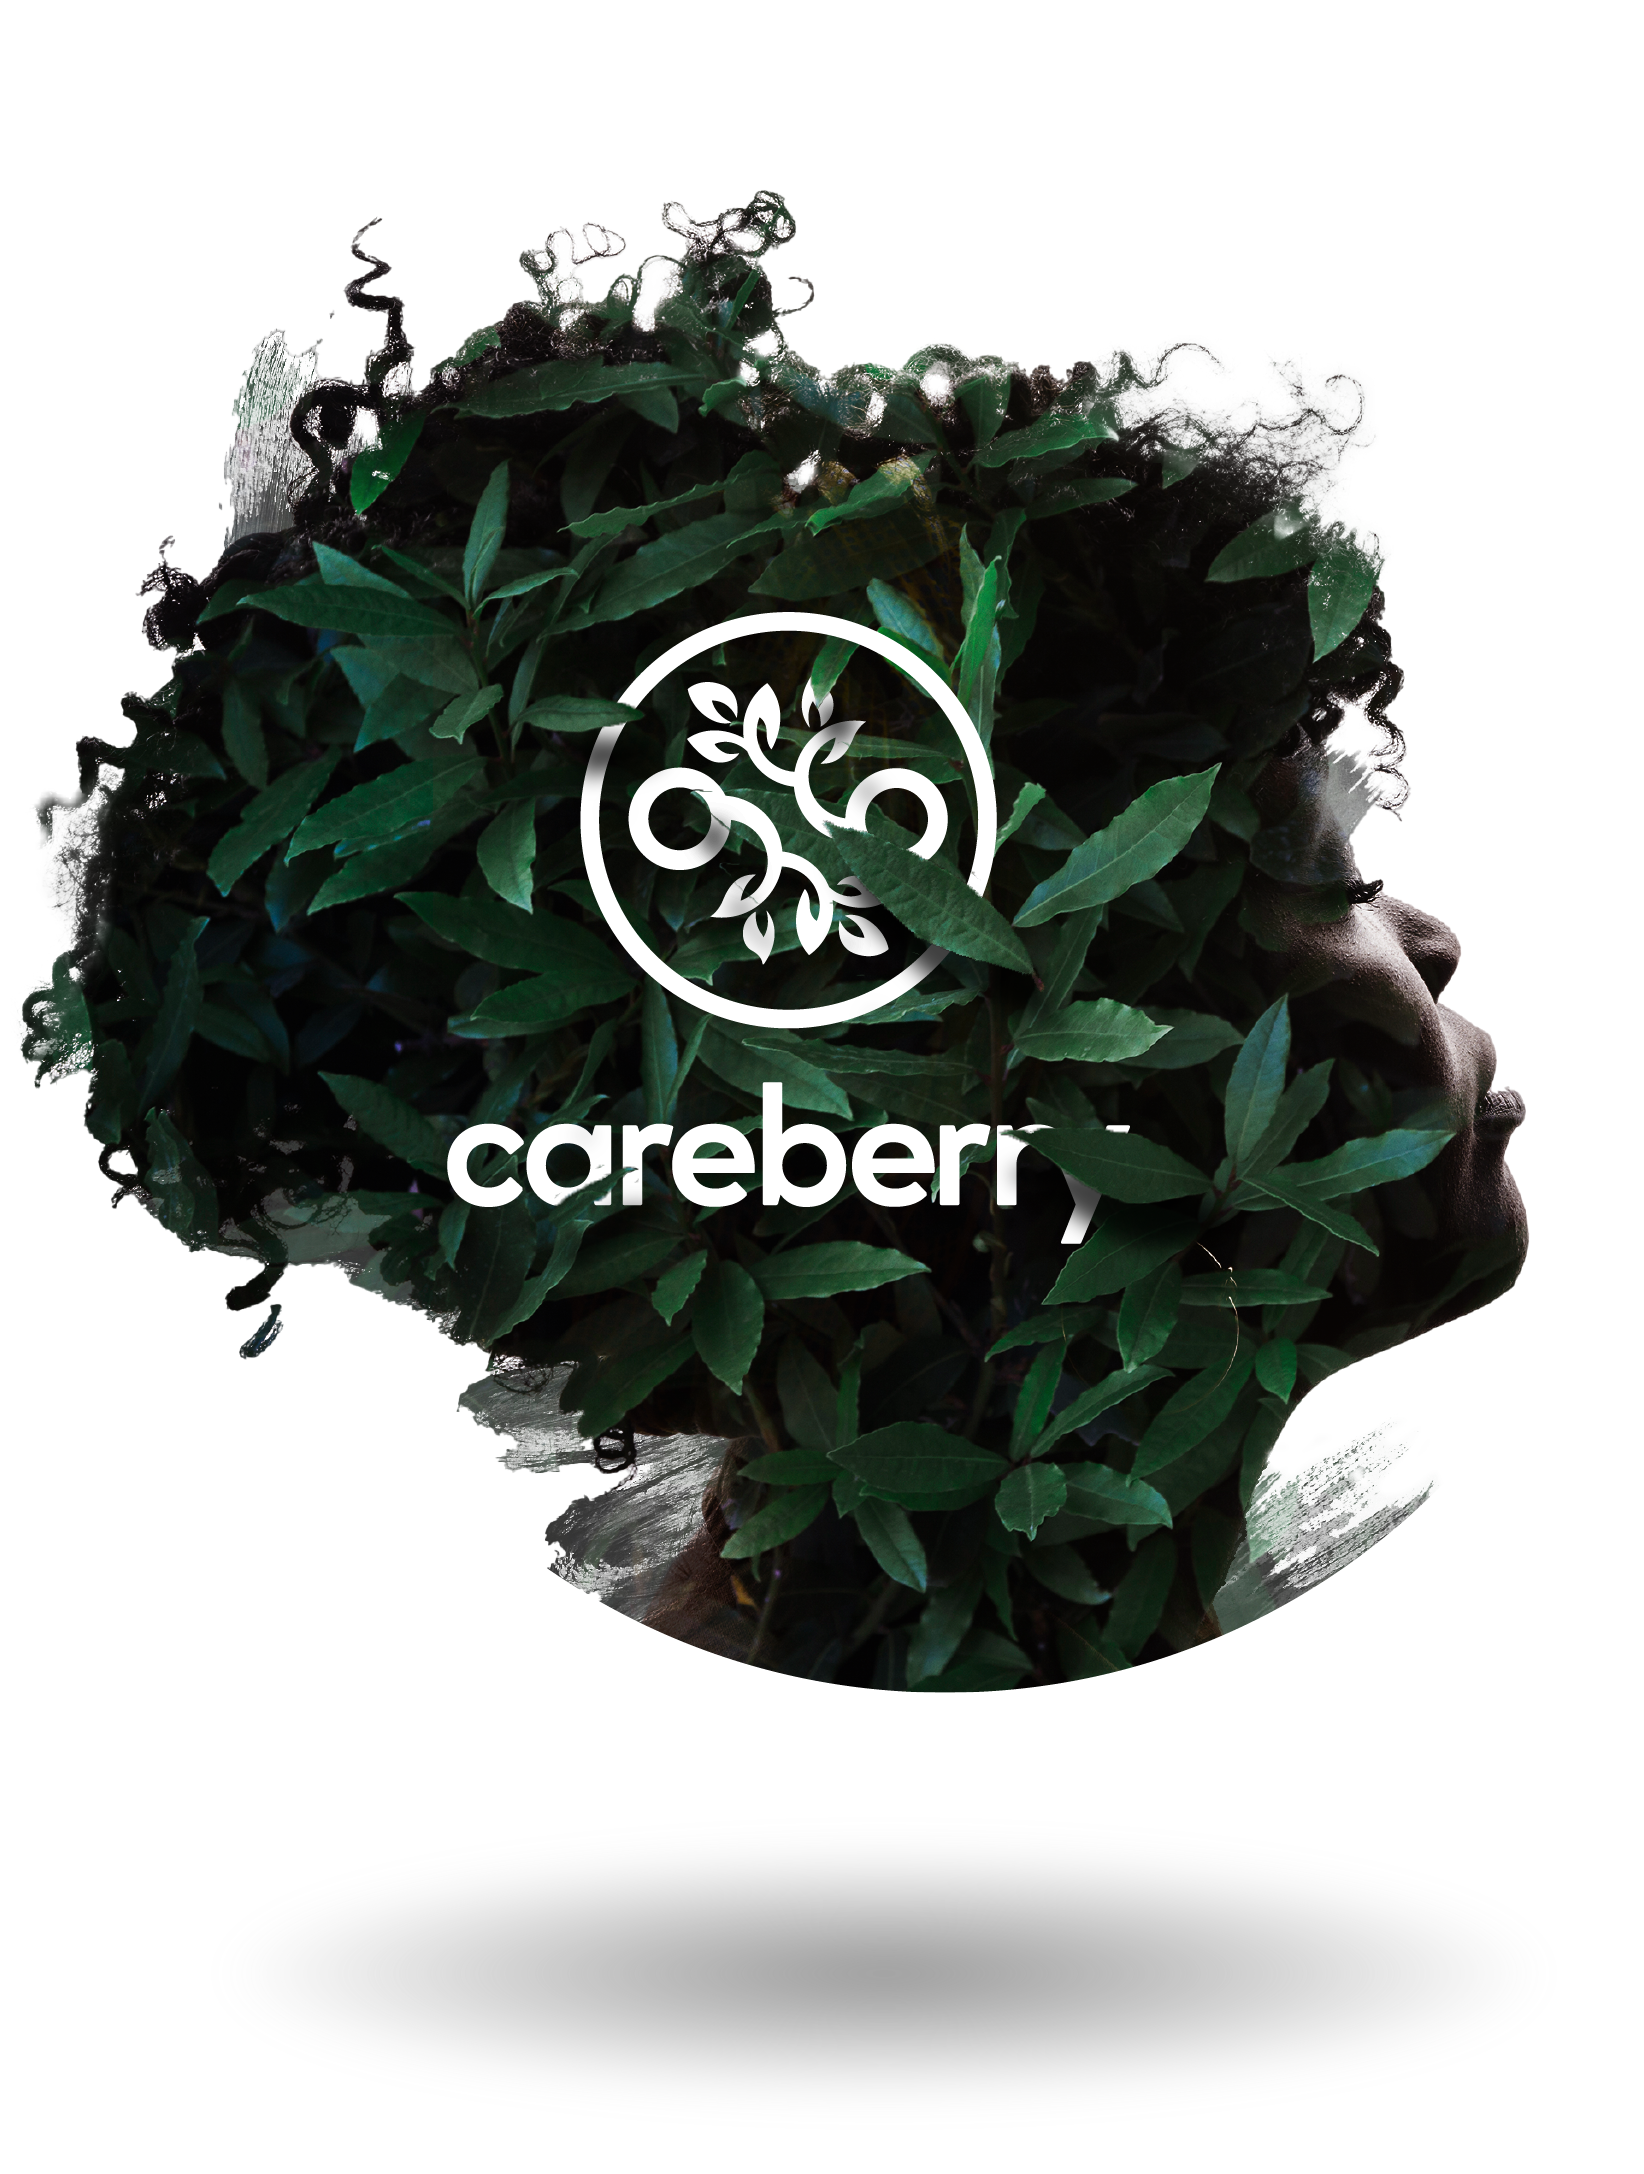 Careberry natural products